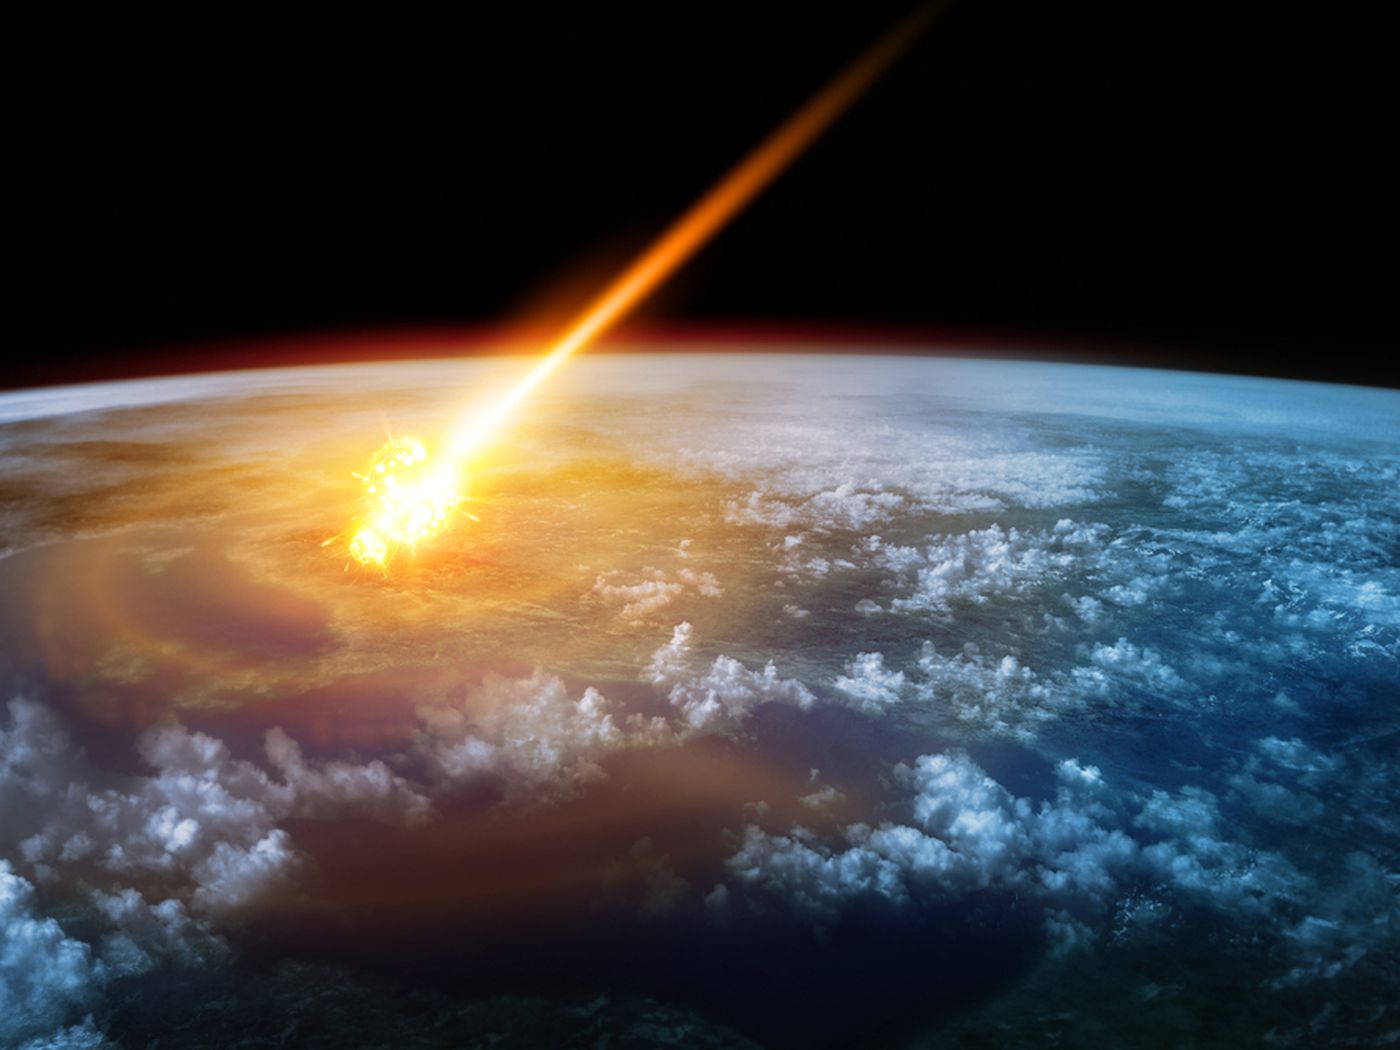 The Comet Hit Earth In 'Don't Look Up' Movie